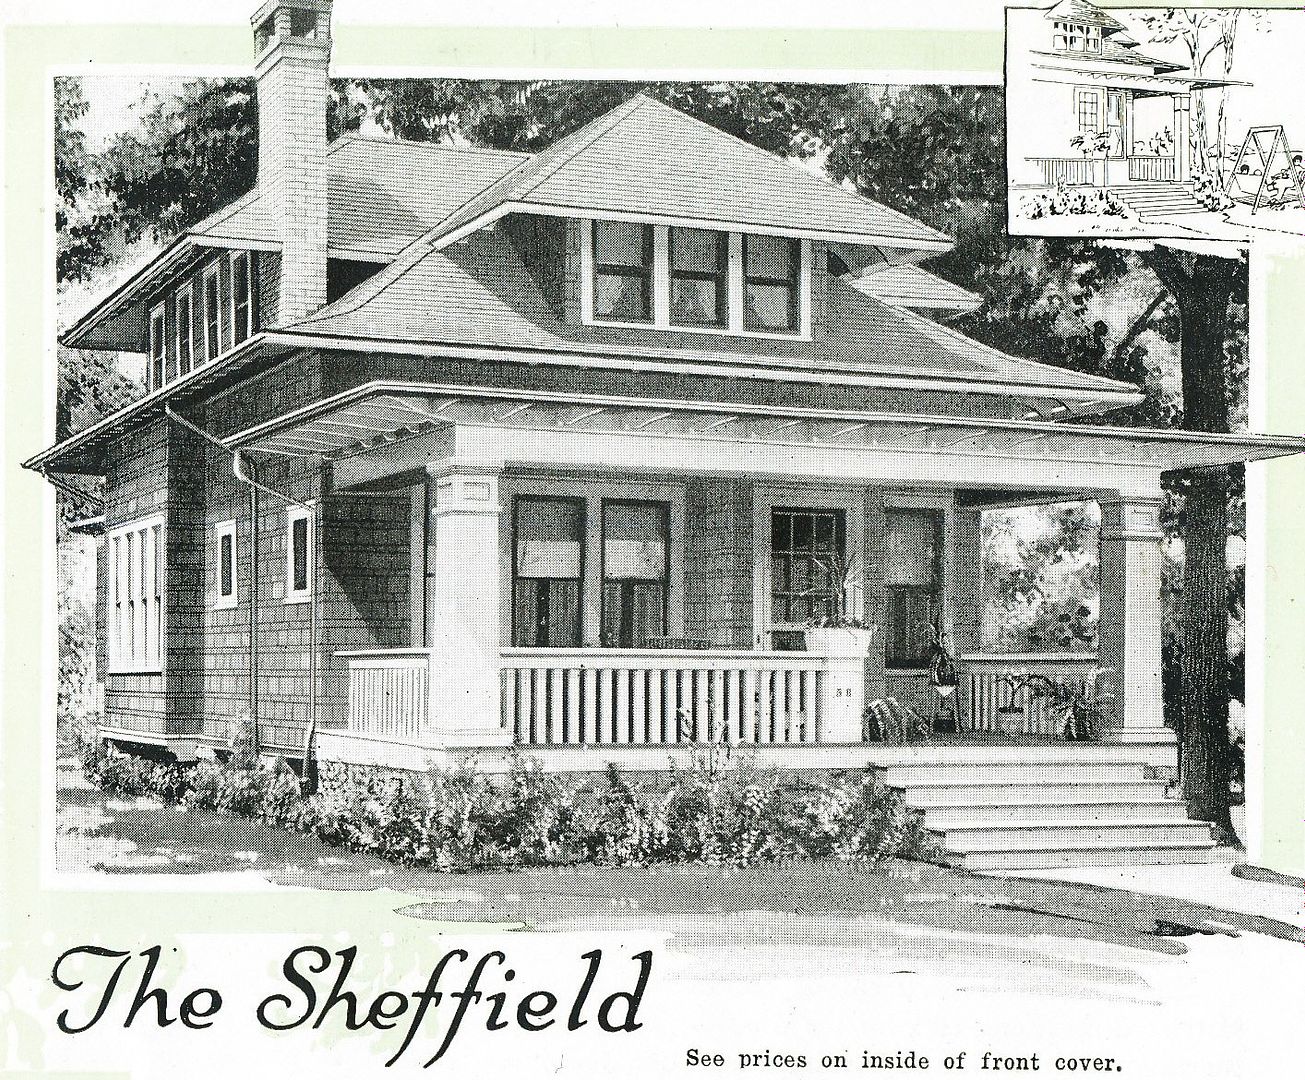 The Sheffield as seen in the 1919 catalog. 